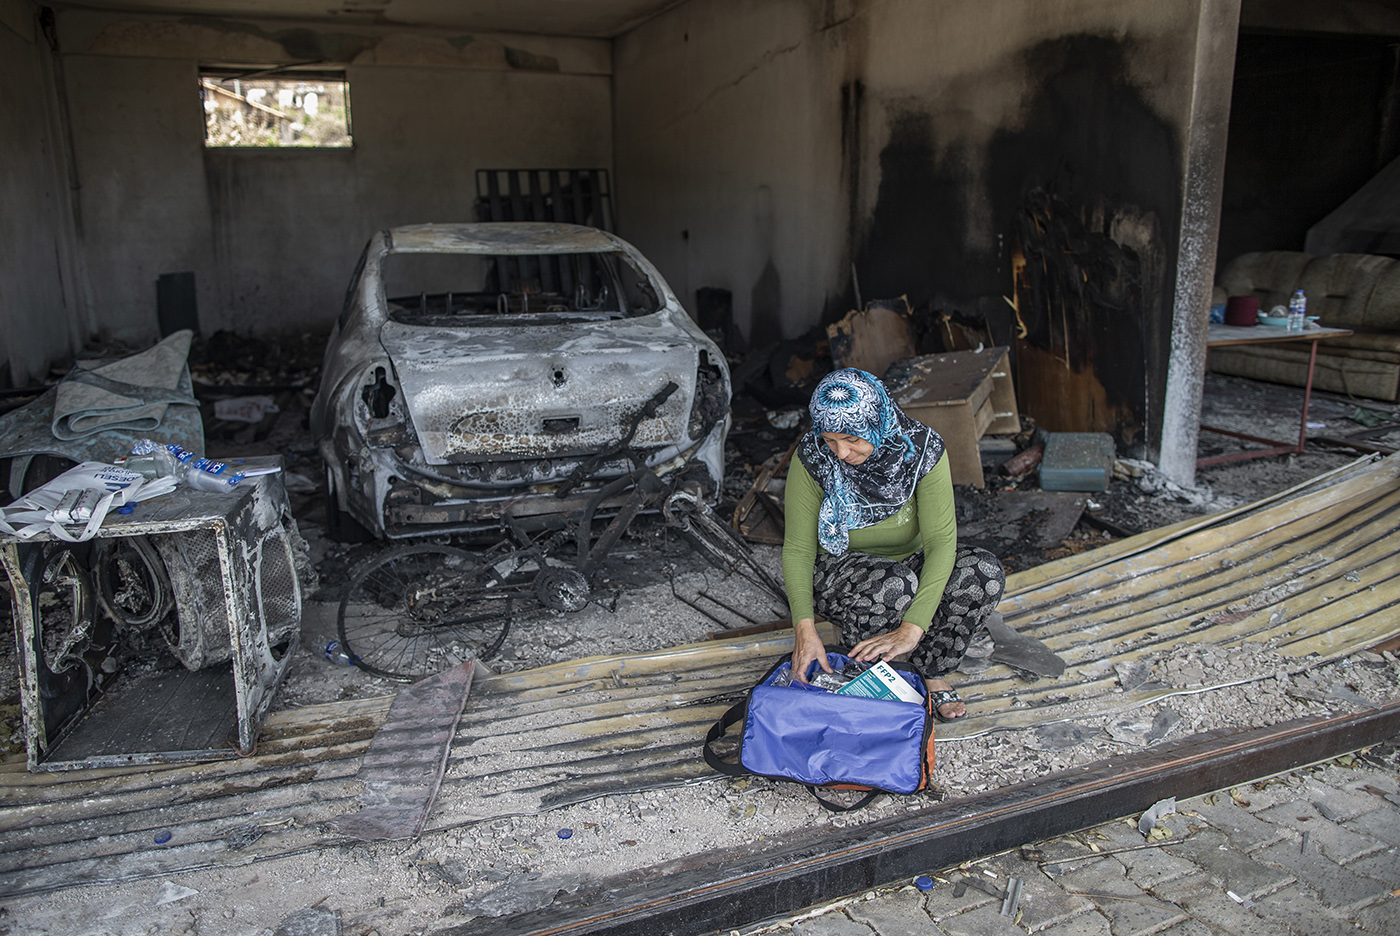 Azize Sert, looks a aid kit in her burnt house after a wildfire at the Evrenseki village of the Manavgat district of Antalya, Turkey, 10 August 2021.